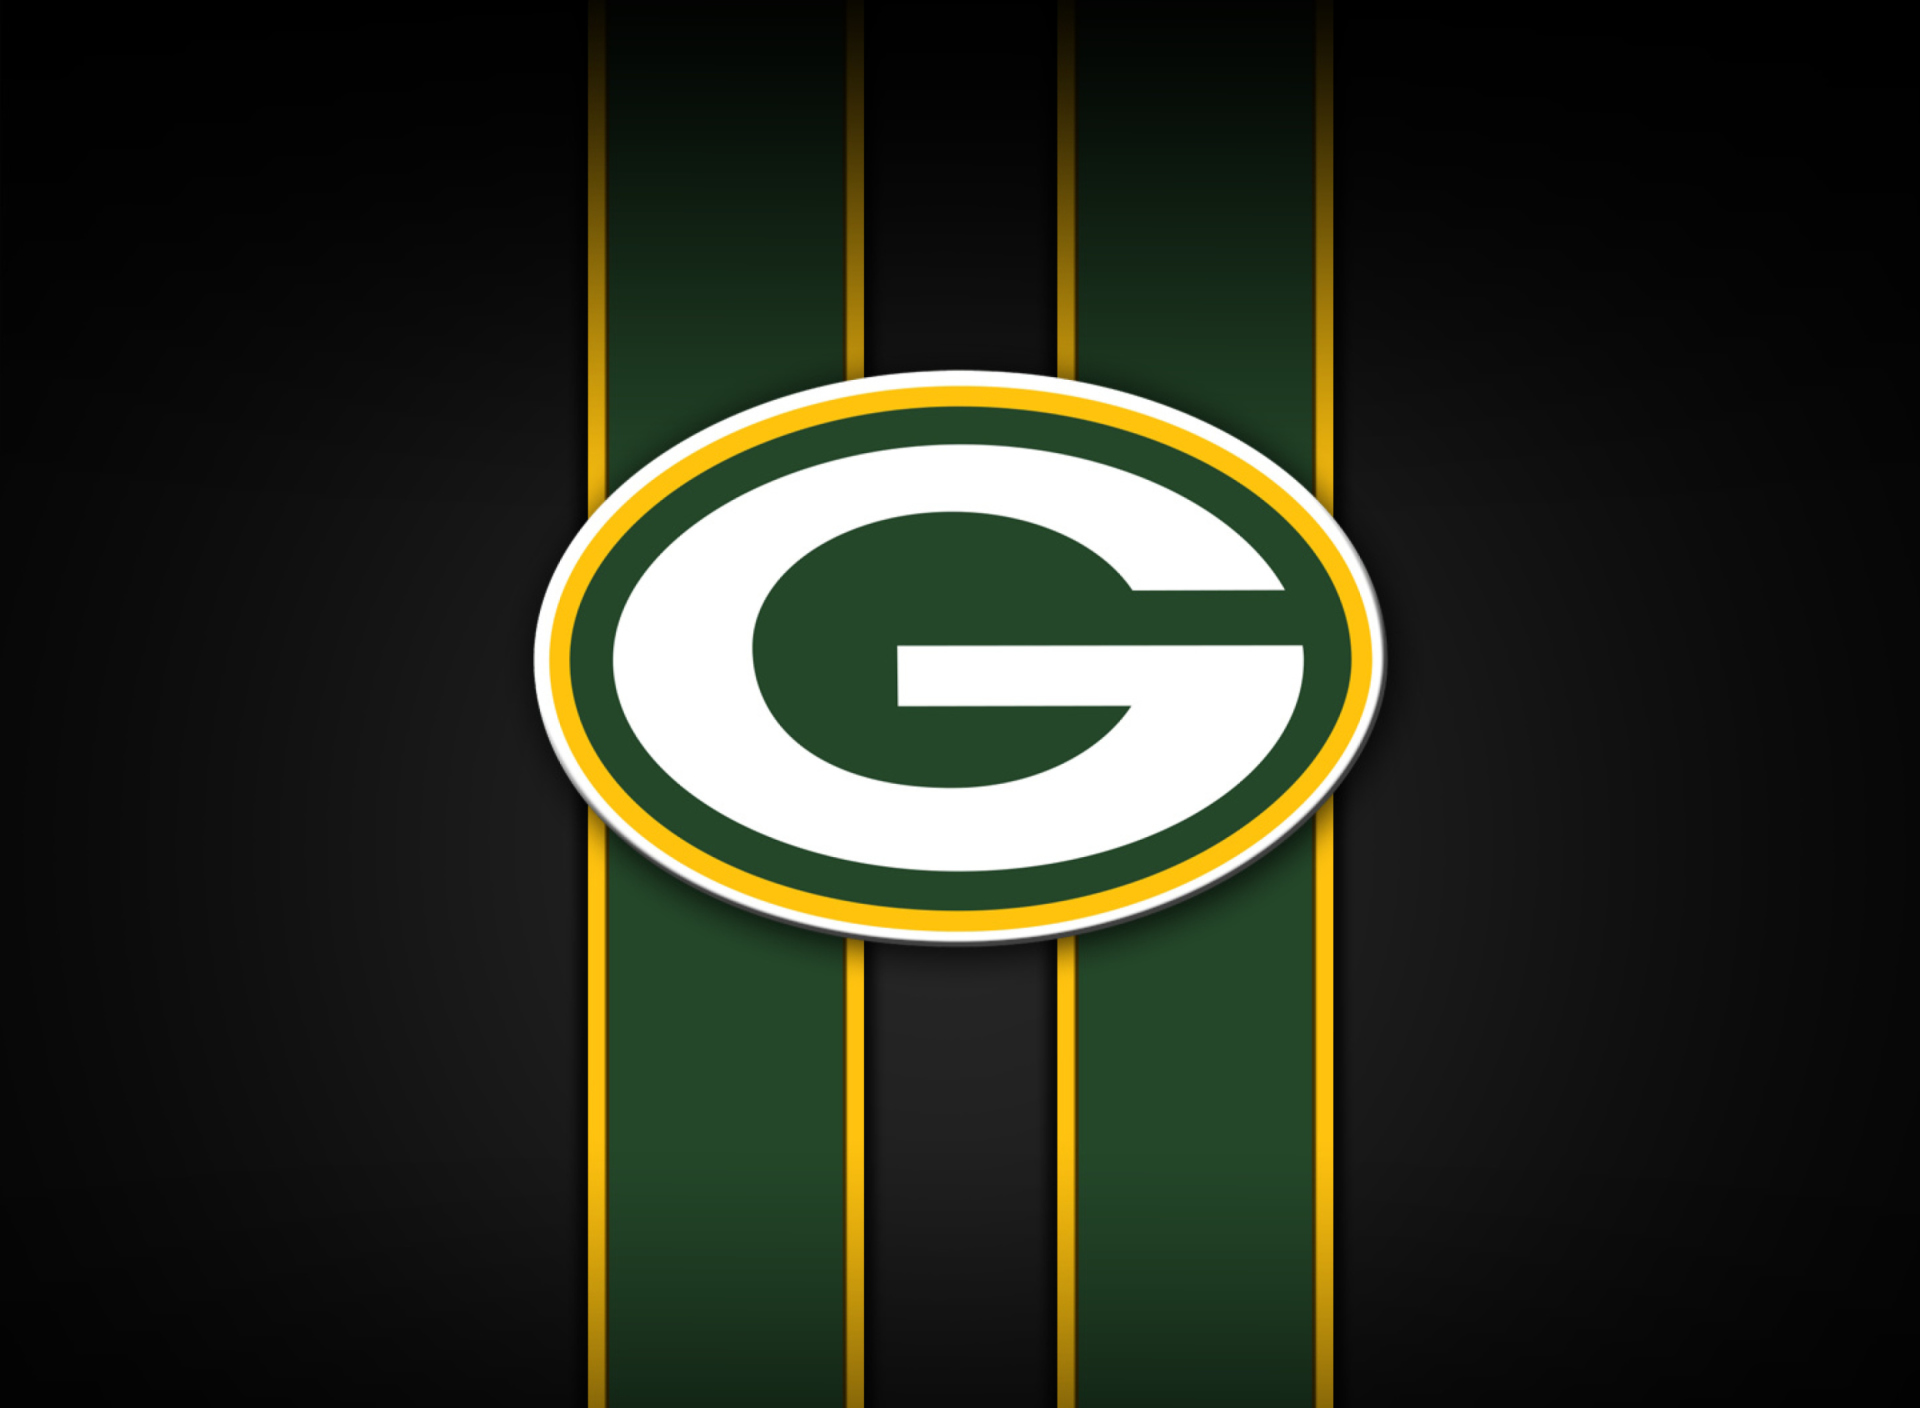 Green Bay Packers Wallpaper for Samsung Galaxy S4